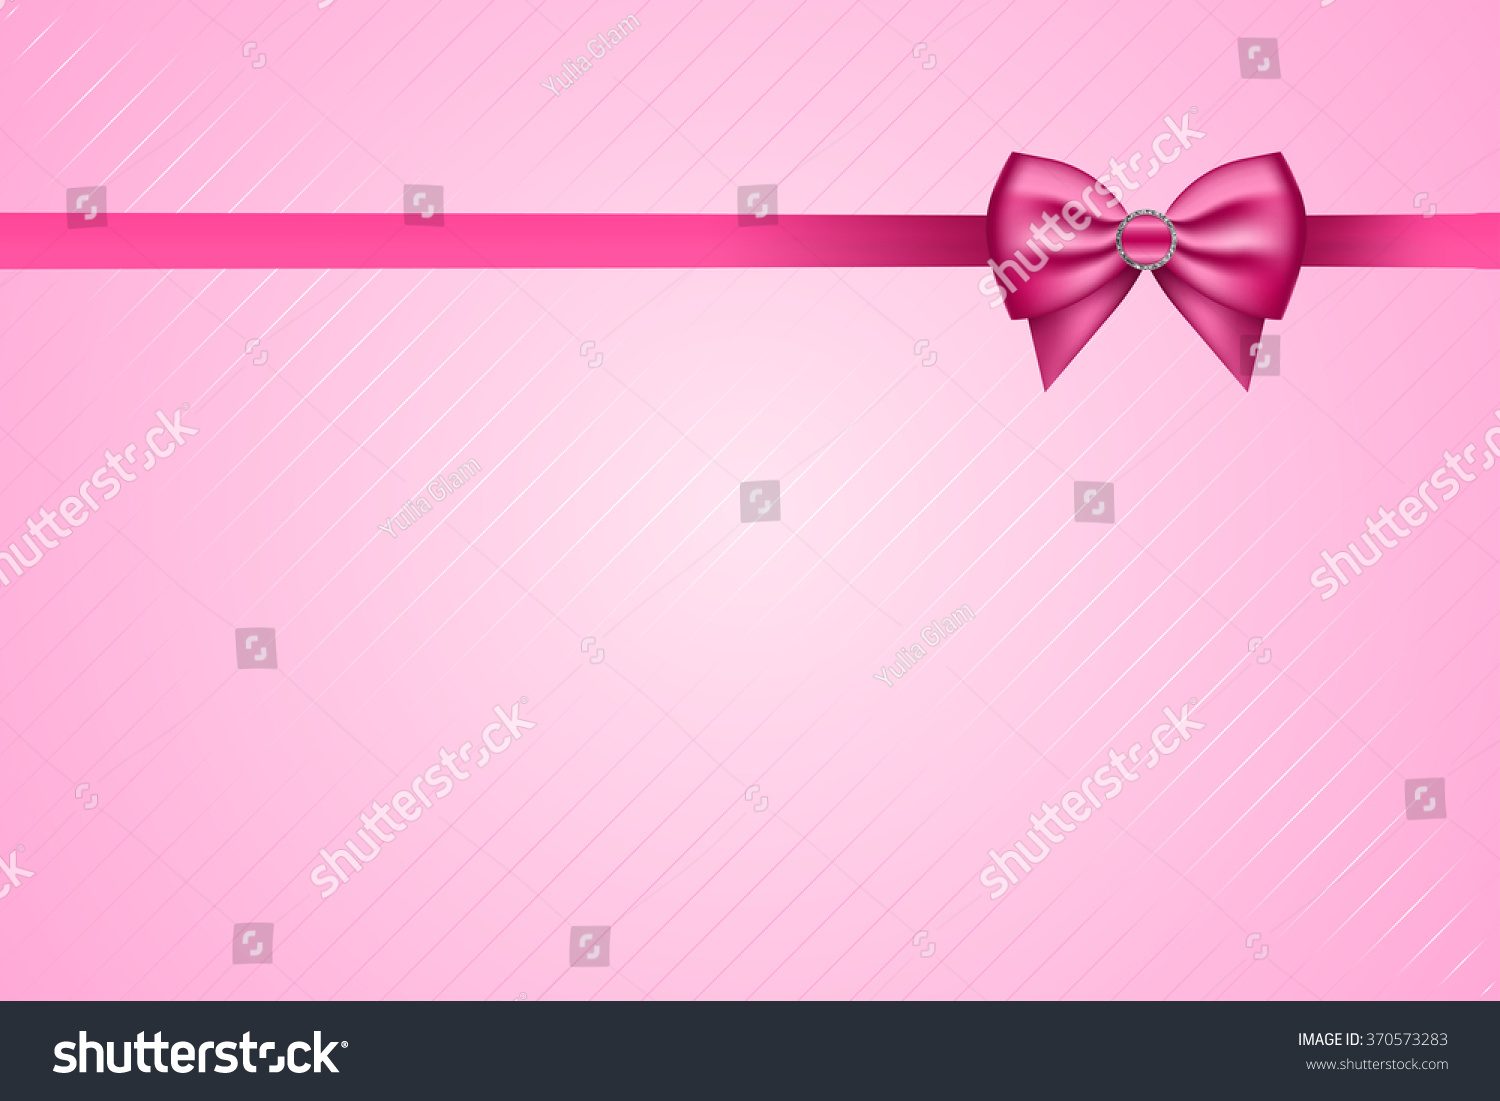 Vector Pink Background With Bow - 370573283 : Shutterstock